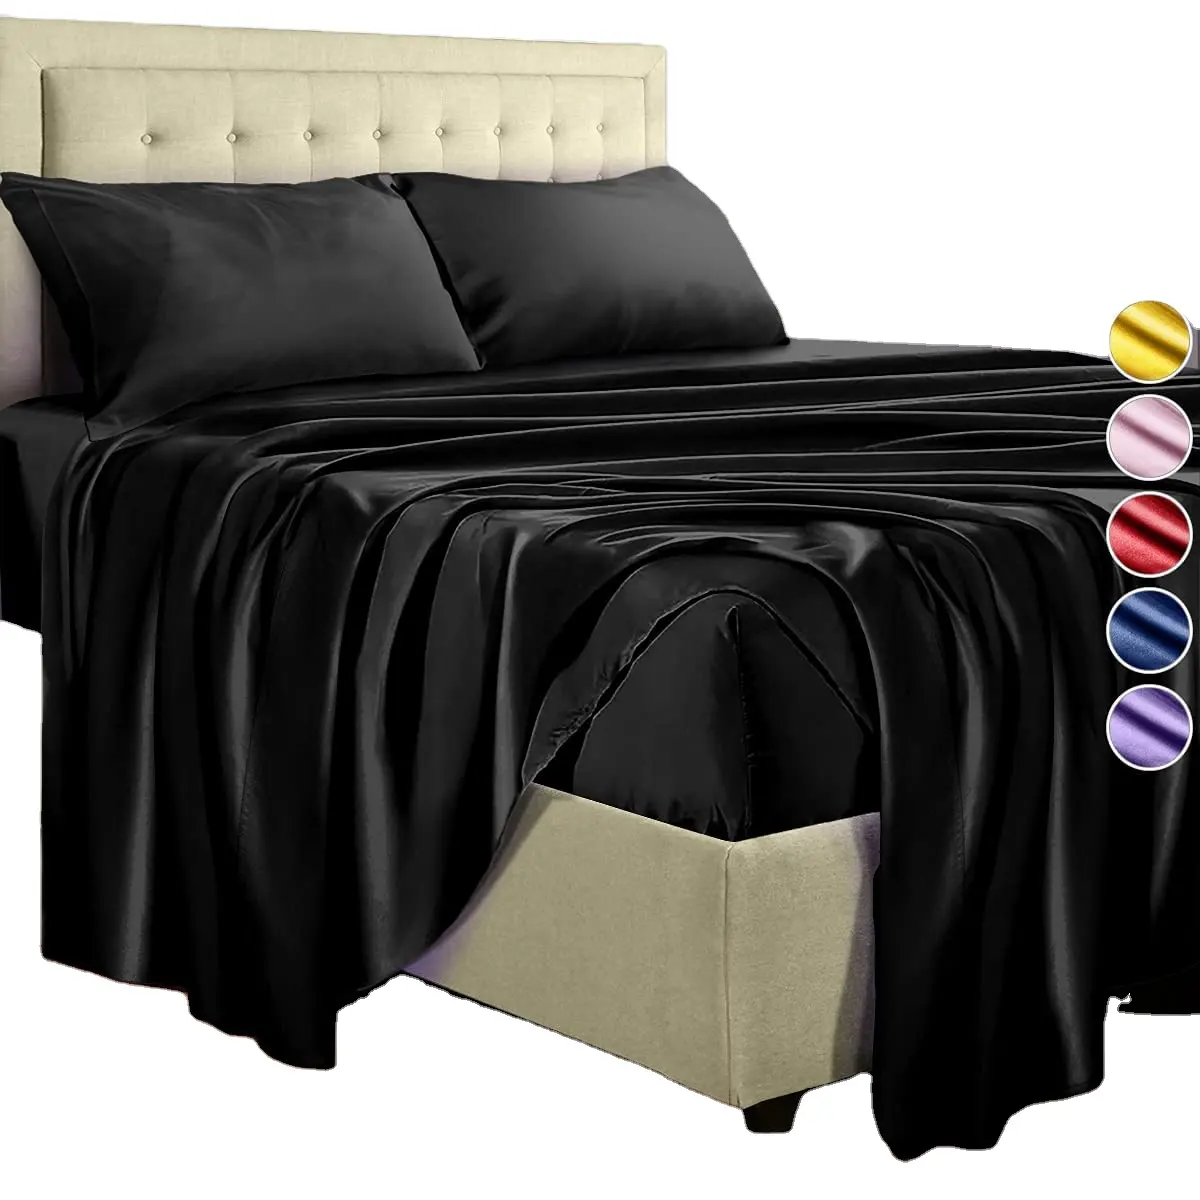 Classic European Style Silk feeling bedding sets wrinkle free cooling satin bed Sheets sets for hotel hospital